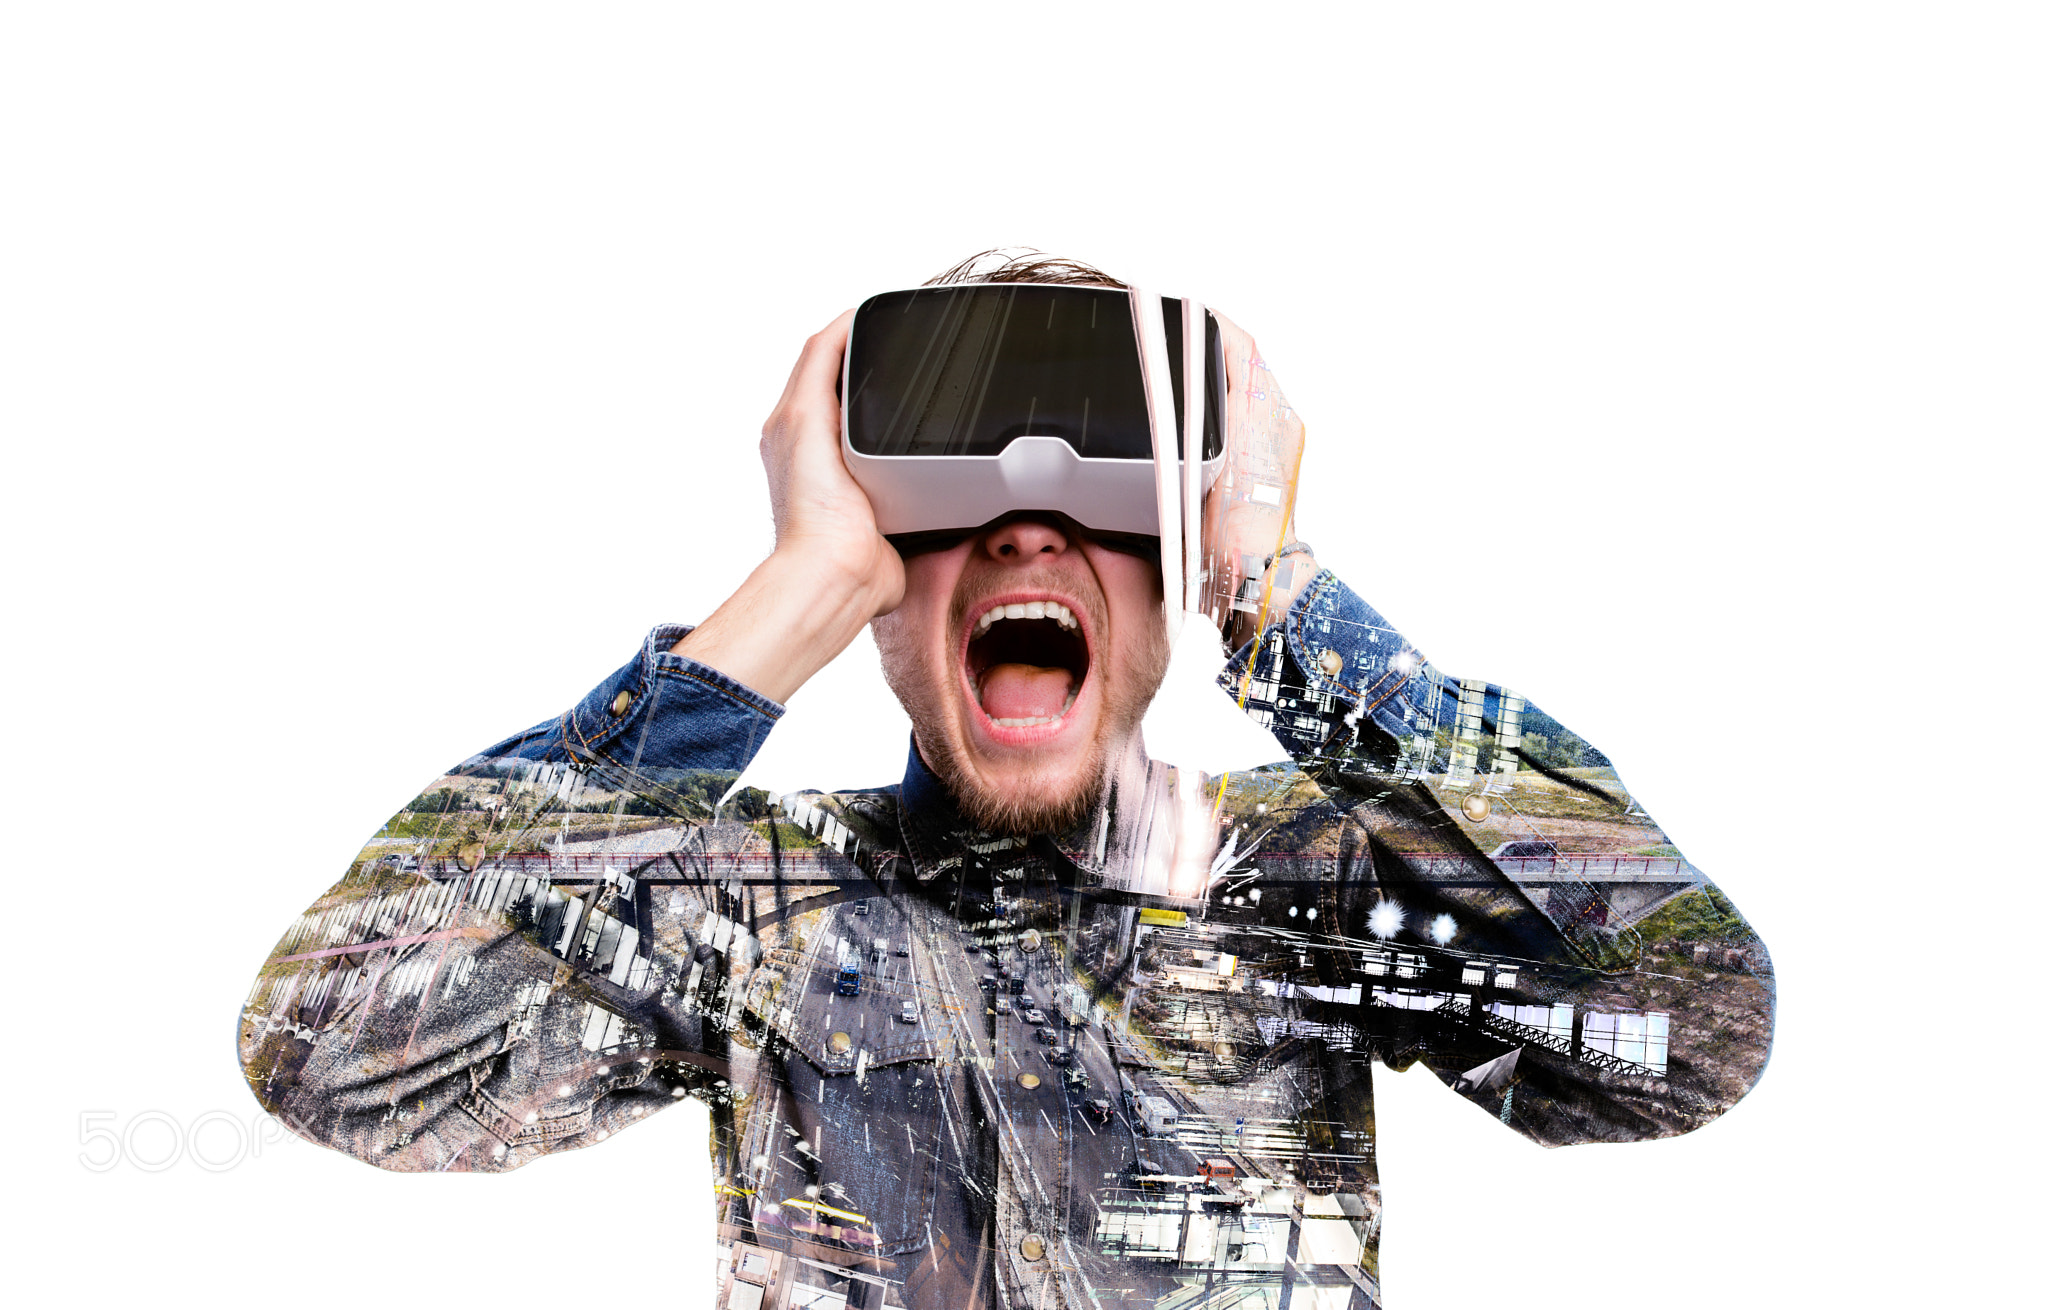 Double exposure. Man wearing virtual reality goggles. Highway.